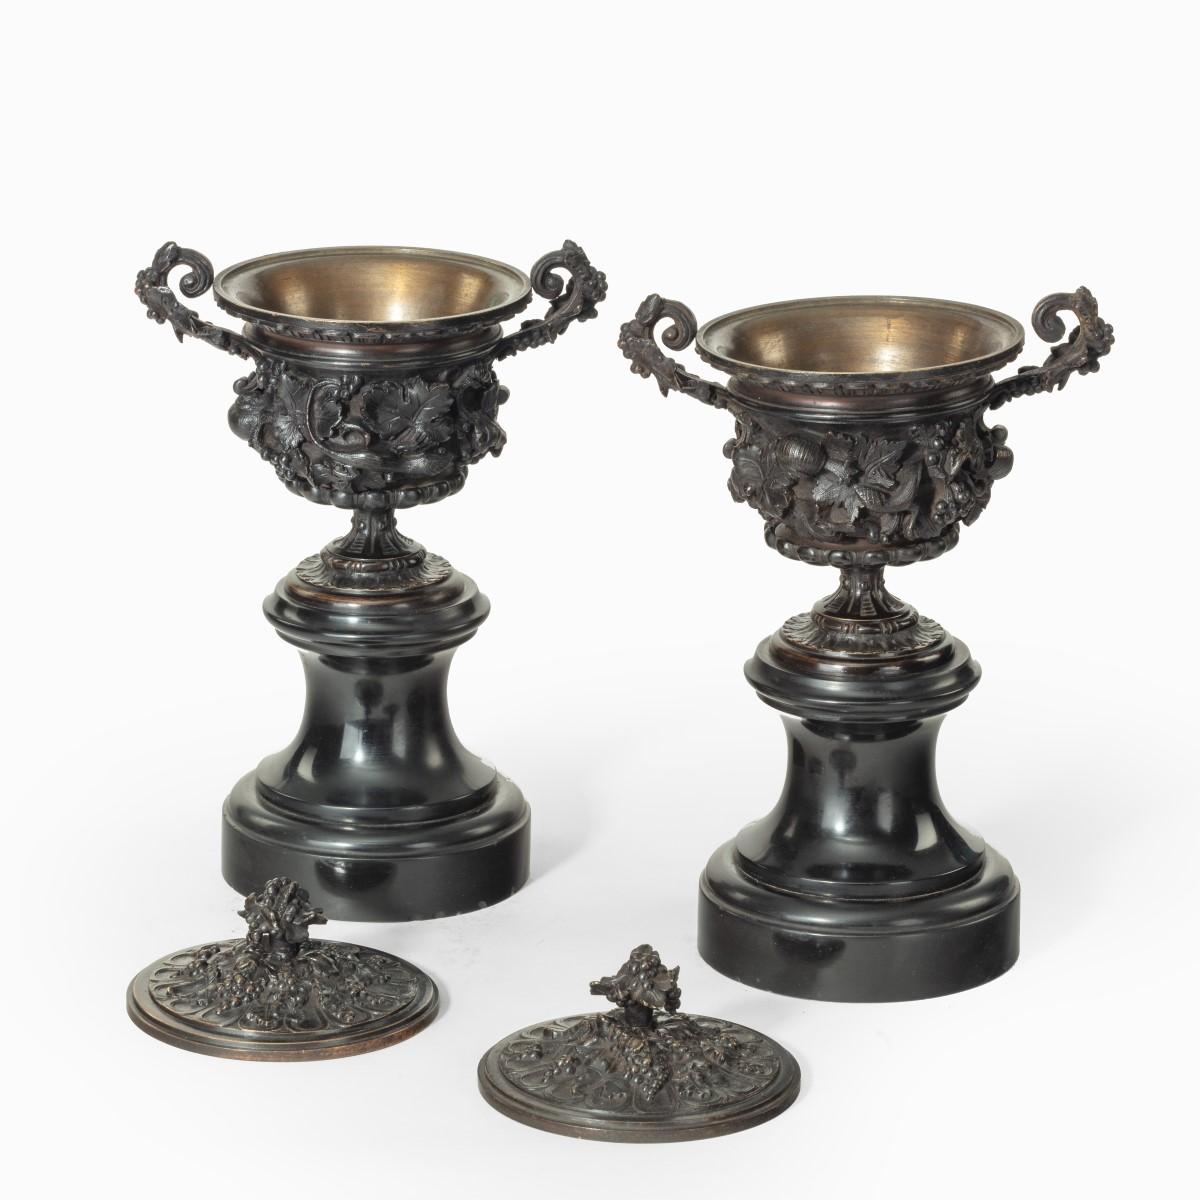 A Fine Pair of Bronze Urns or Vases and Covers c.1870 For Sale 4